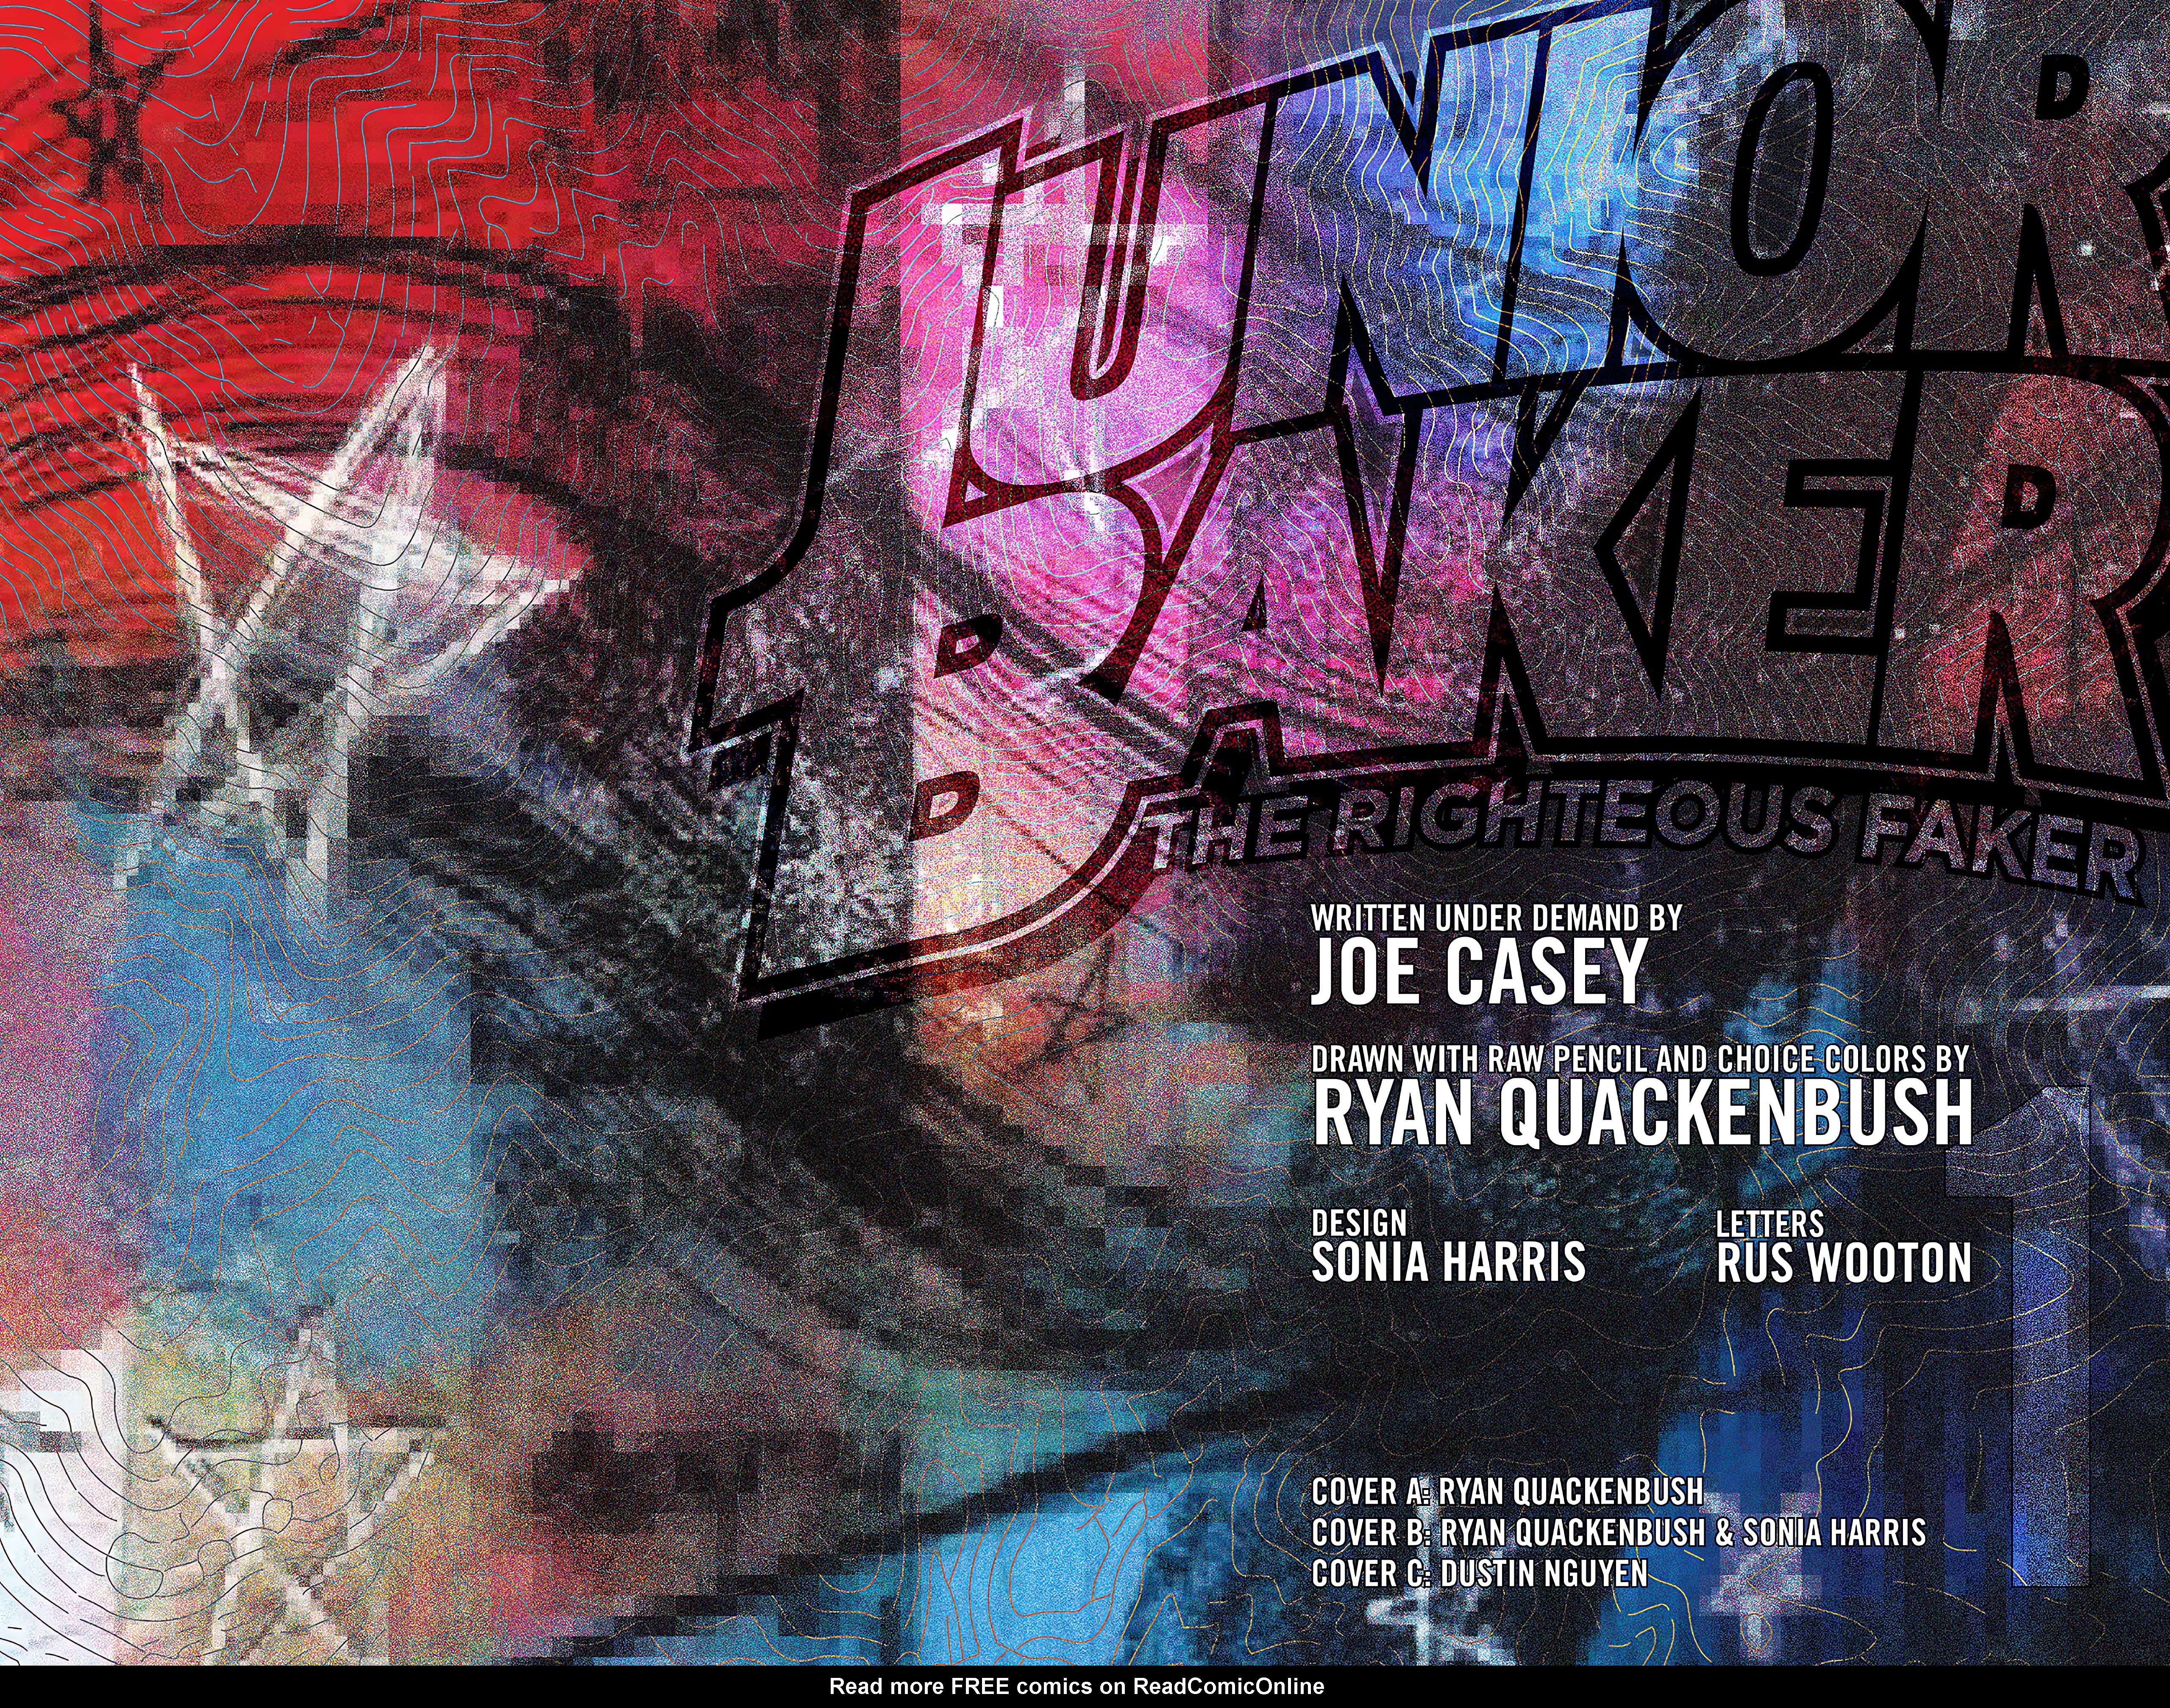 Read online Junior Baker the Righteous Faker comic -  Issue #1 - 2